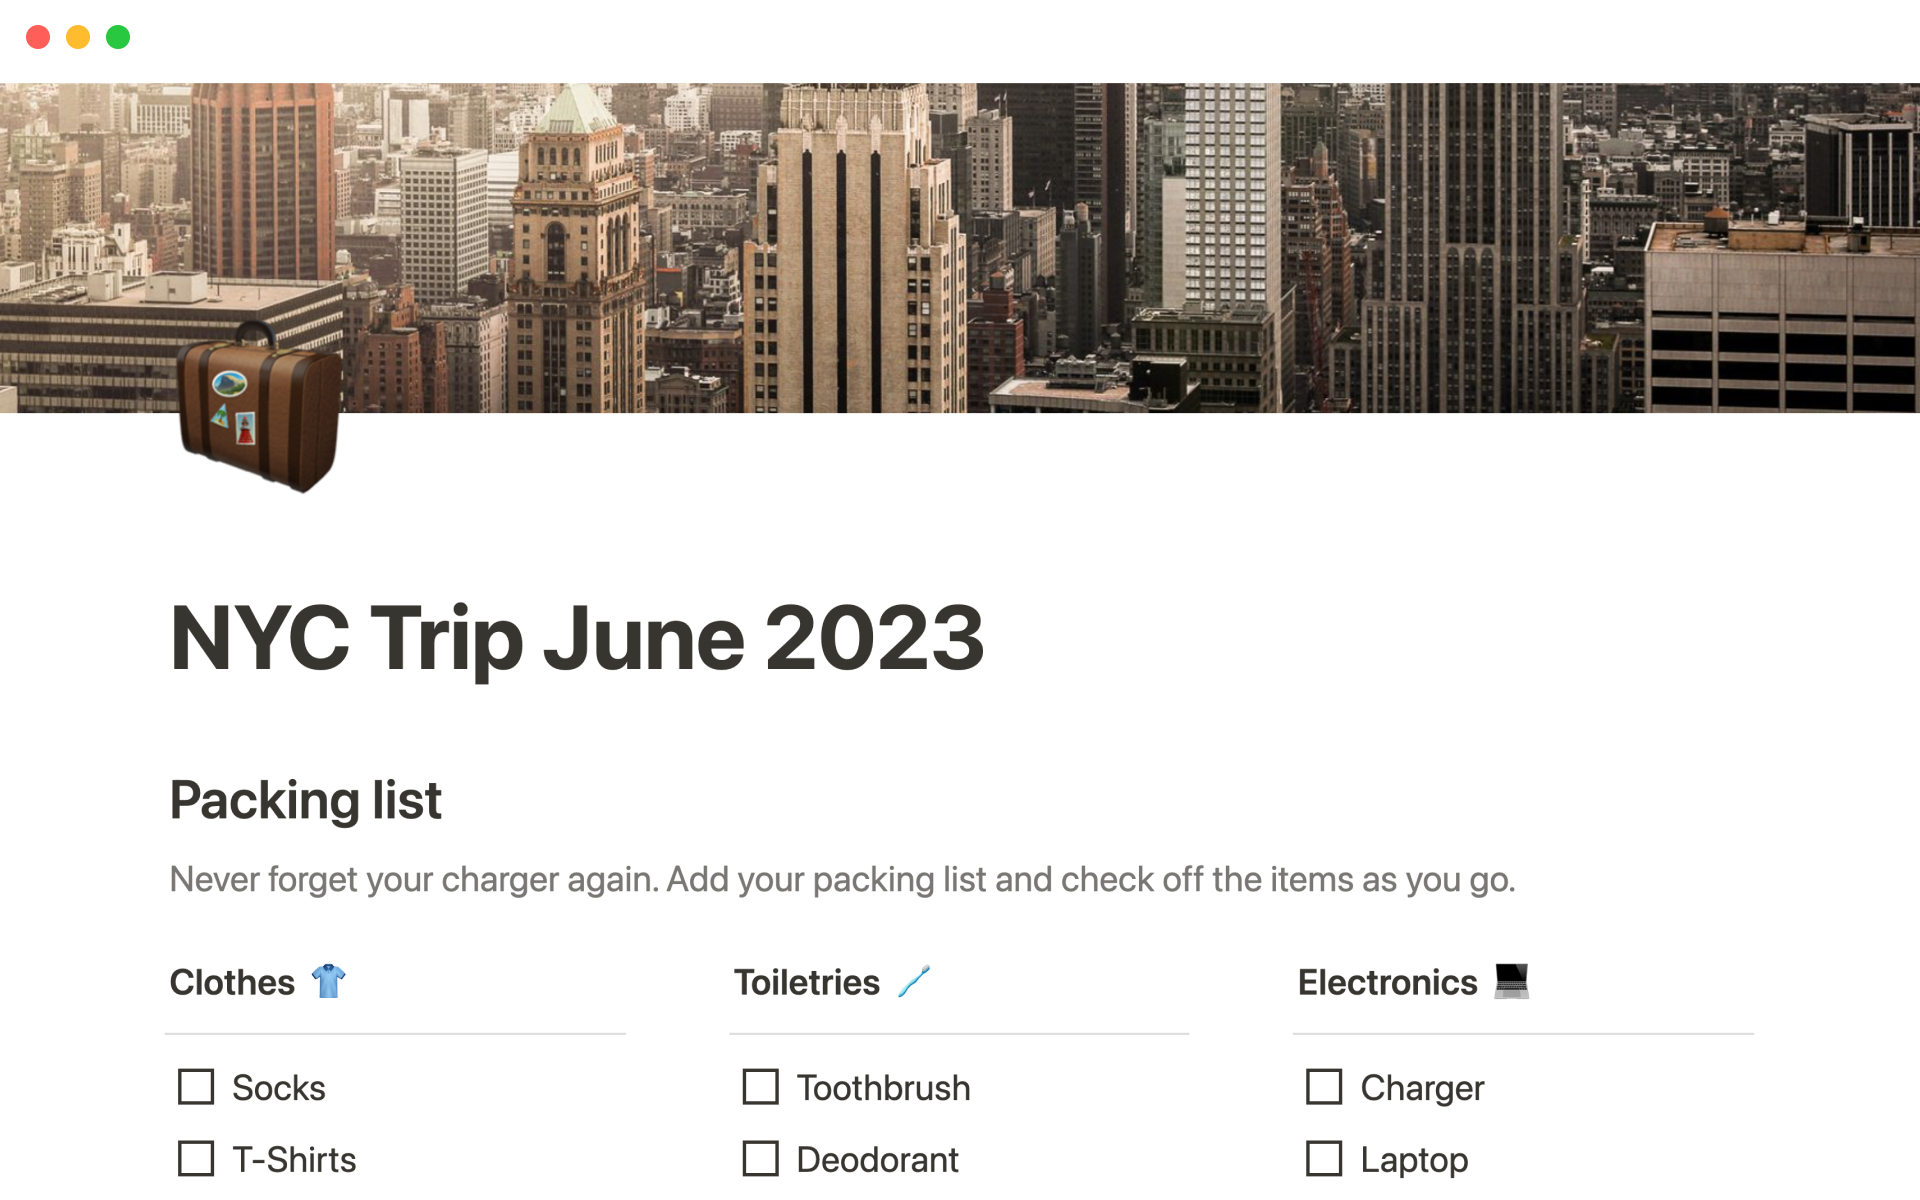 Make travel planning fun with this setup — a packing list, trip planner, and shareable itinerary, all in one.